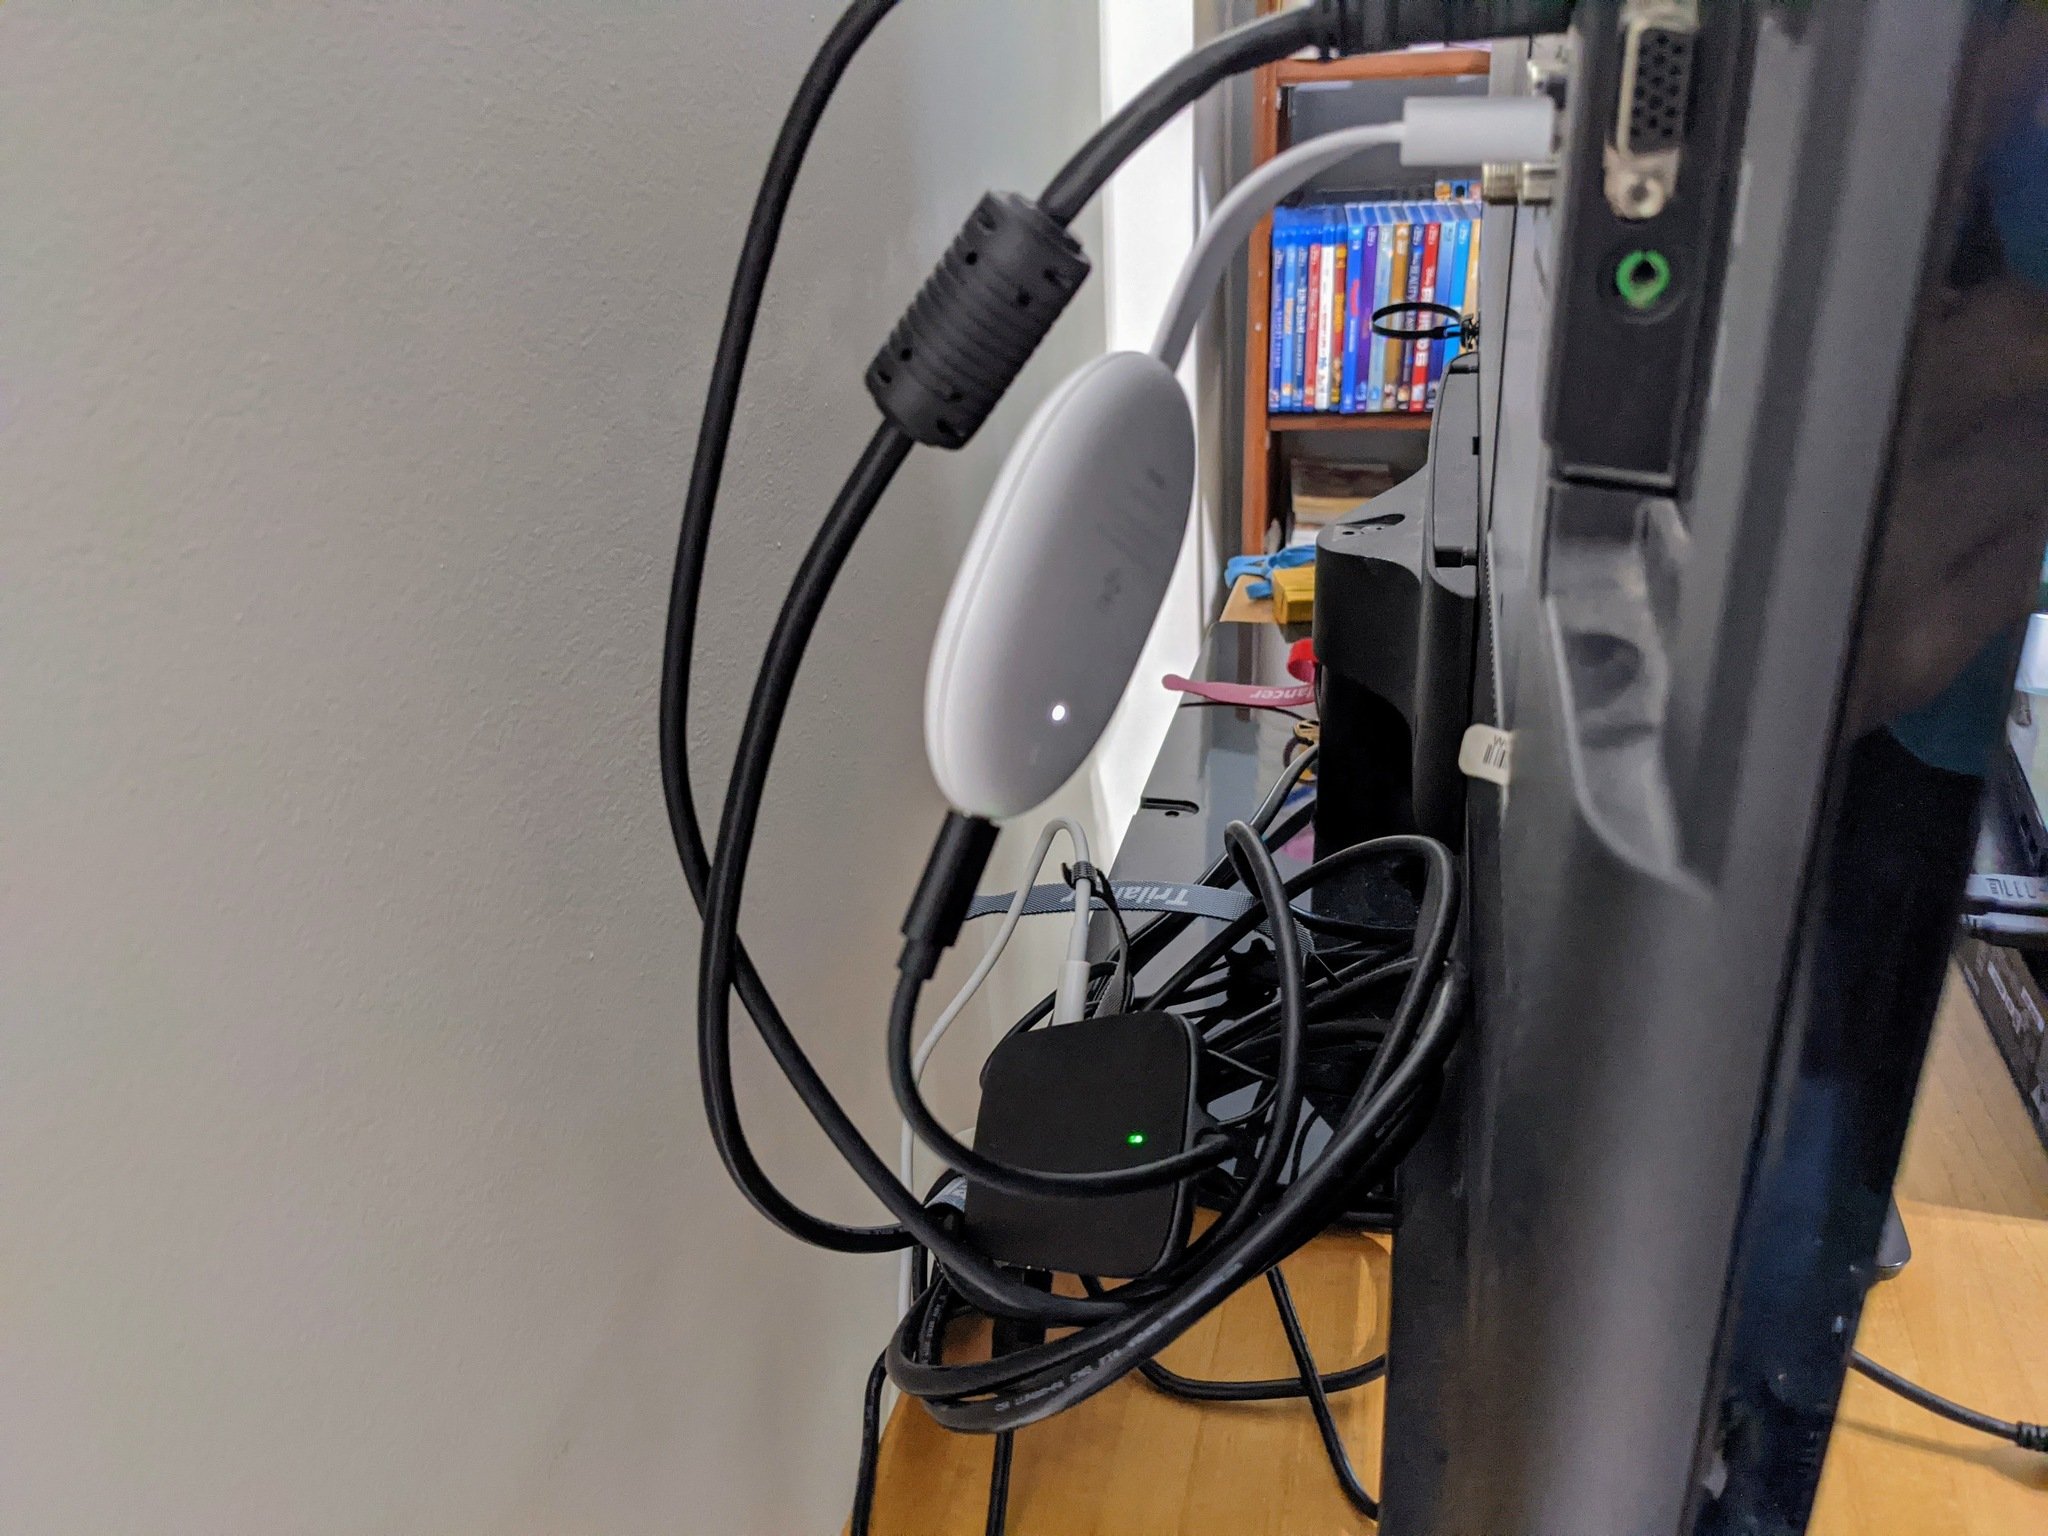 Ethernet Adapter for Chromecast with Google TV